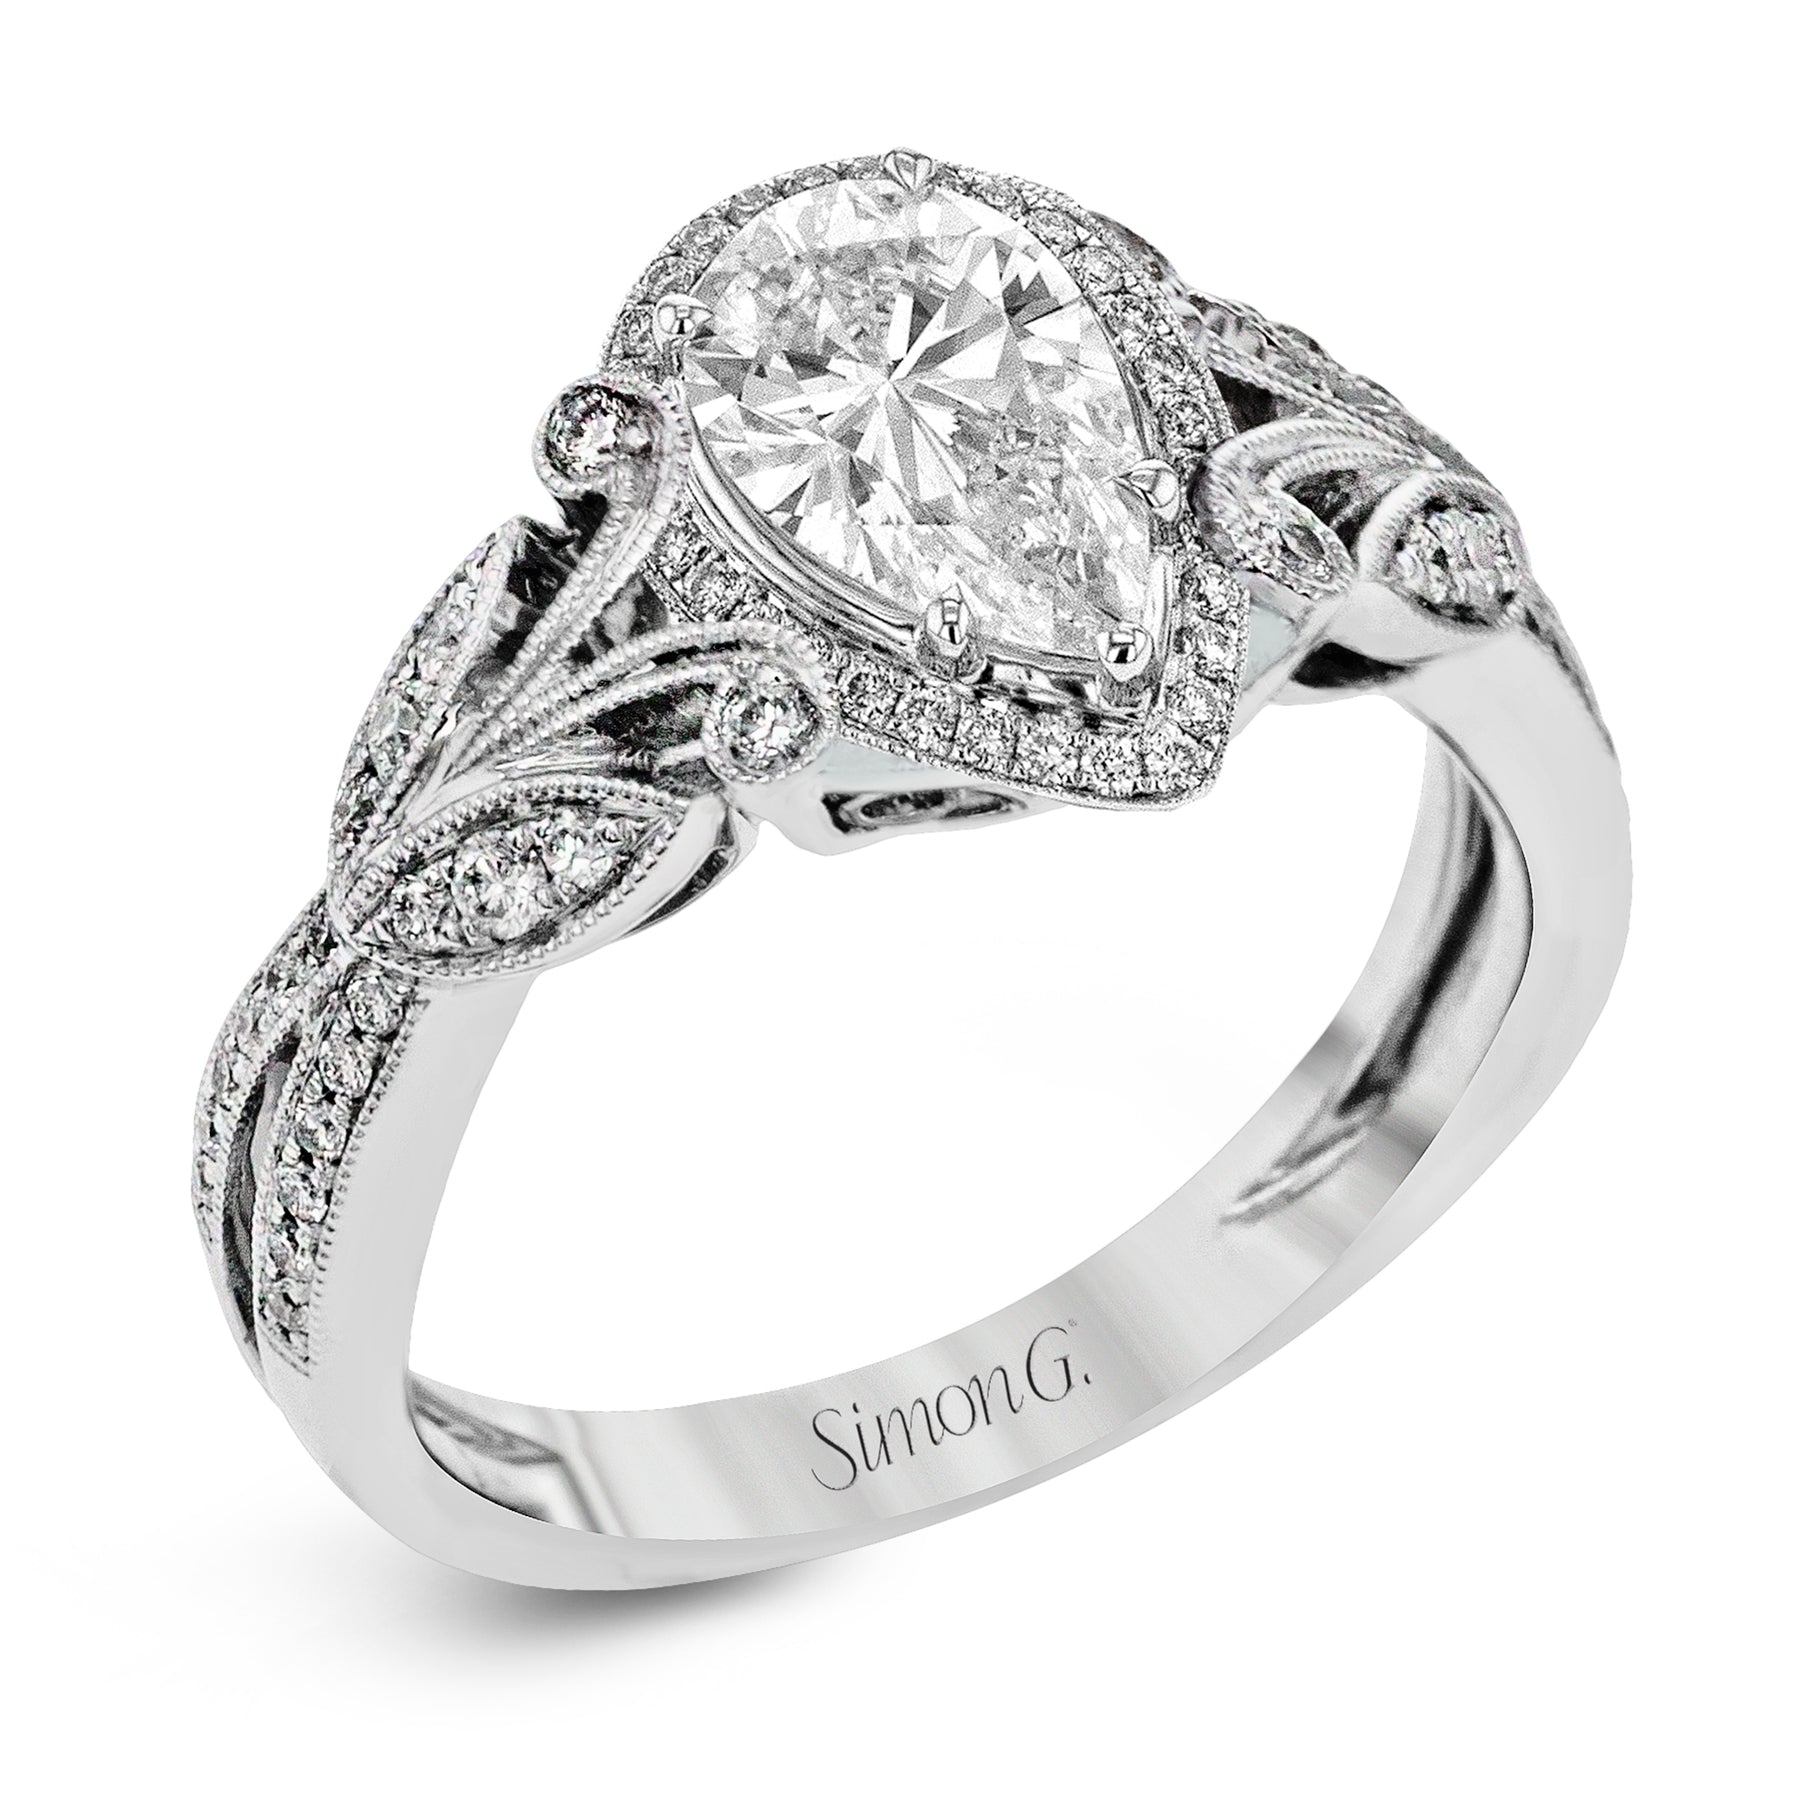 Pear-Cut Halo Engagement Ring In 18k Gold With Diamonds TR629-PR